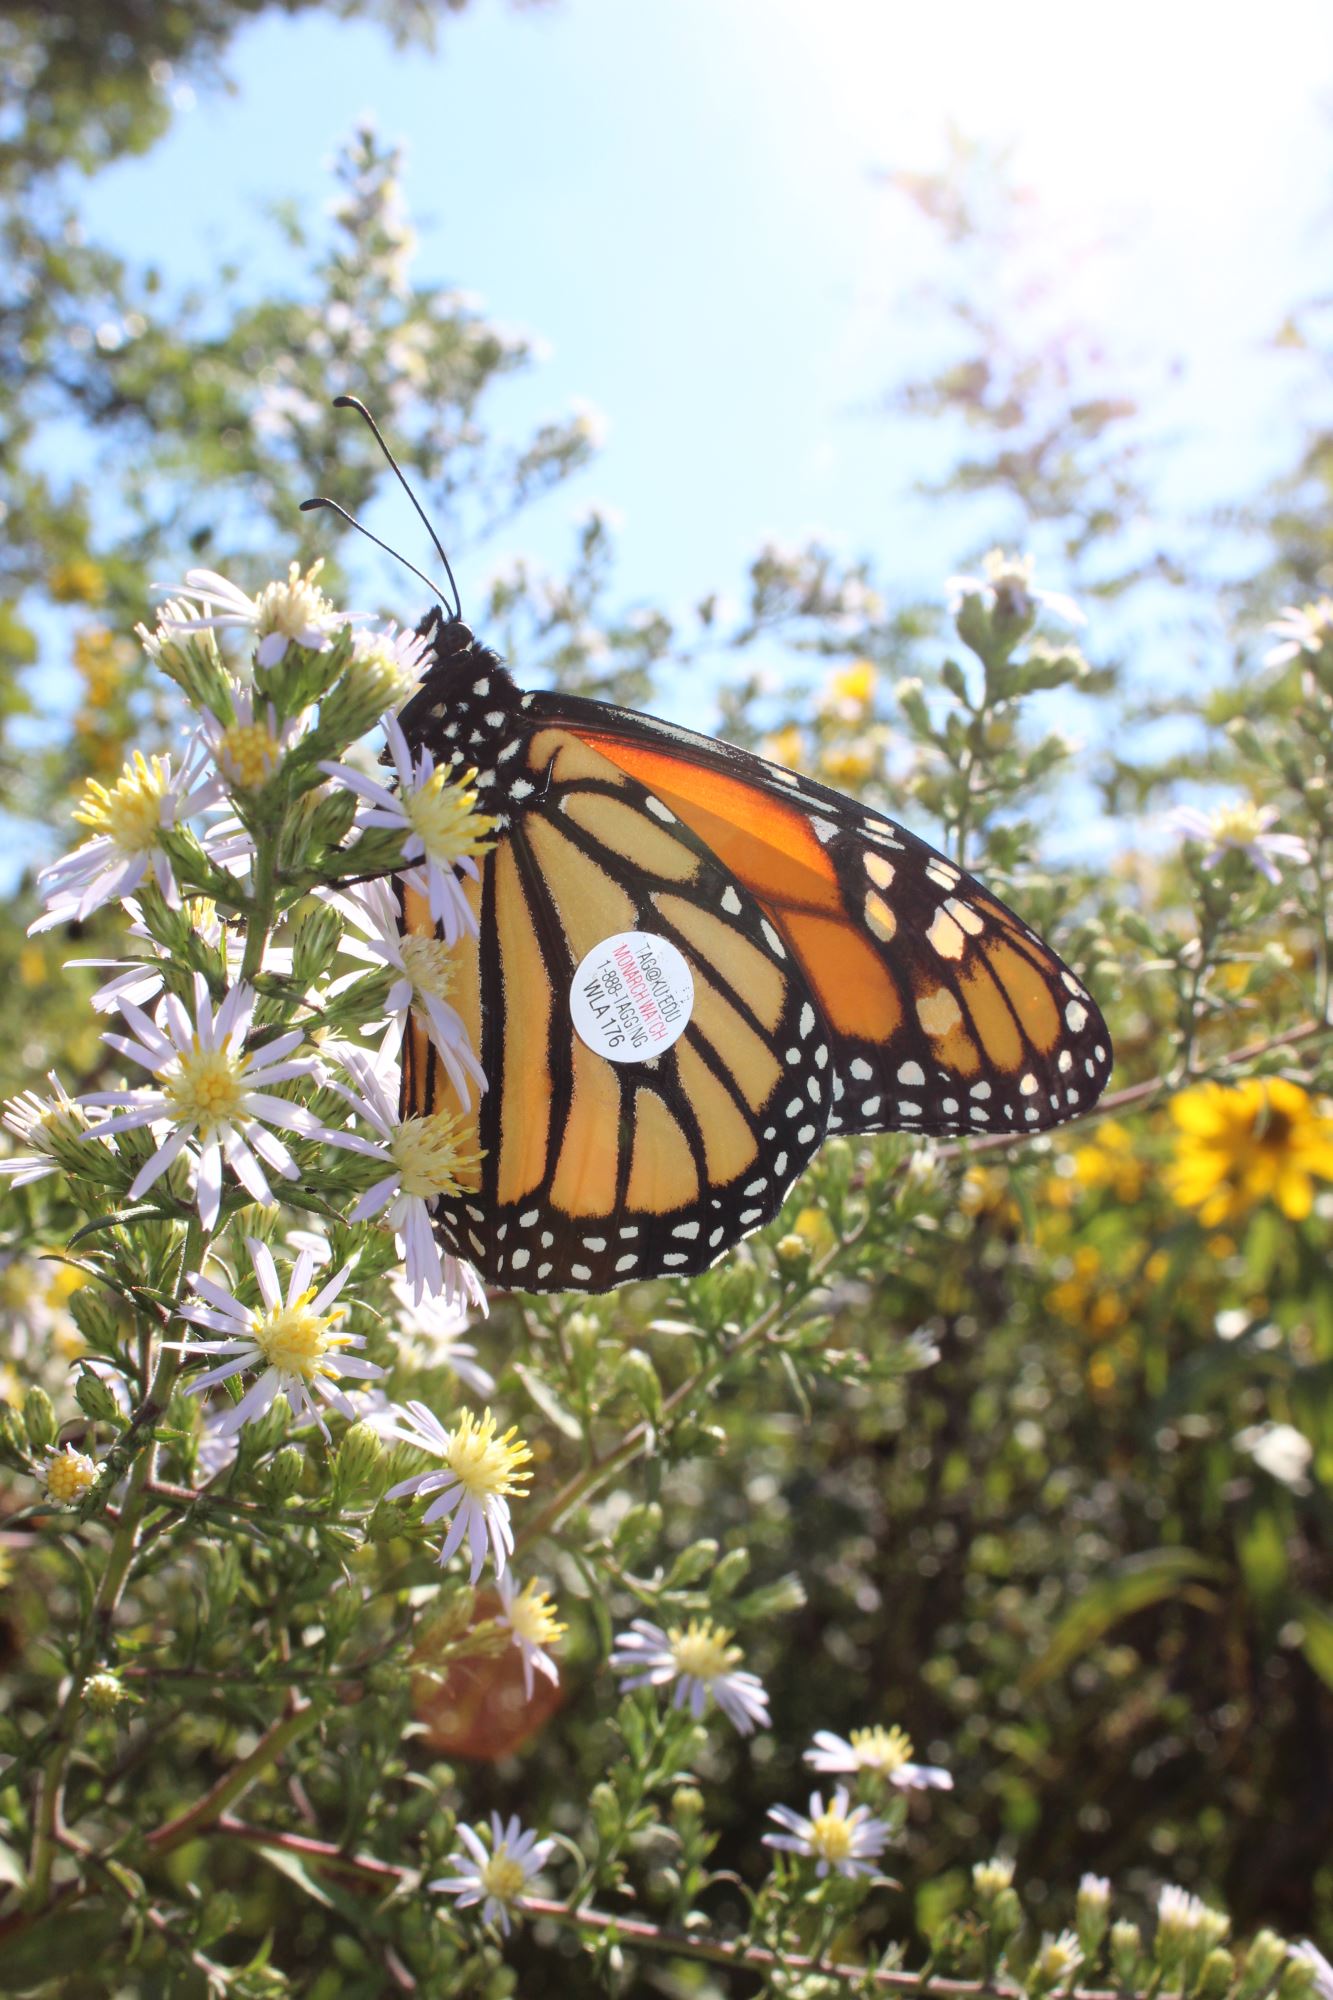 A monarch butterfly with tracking tag